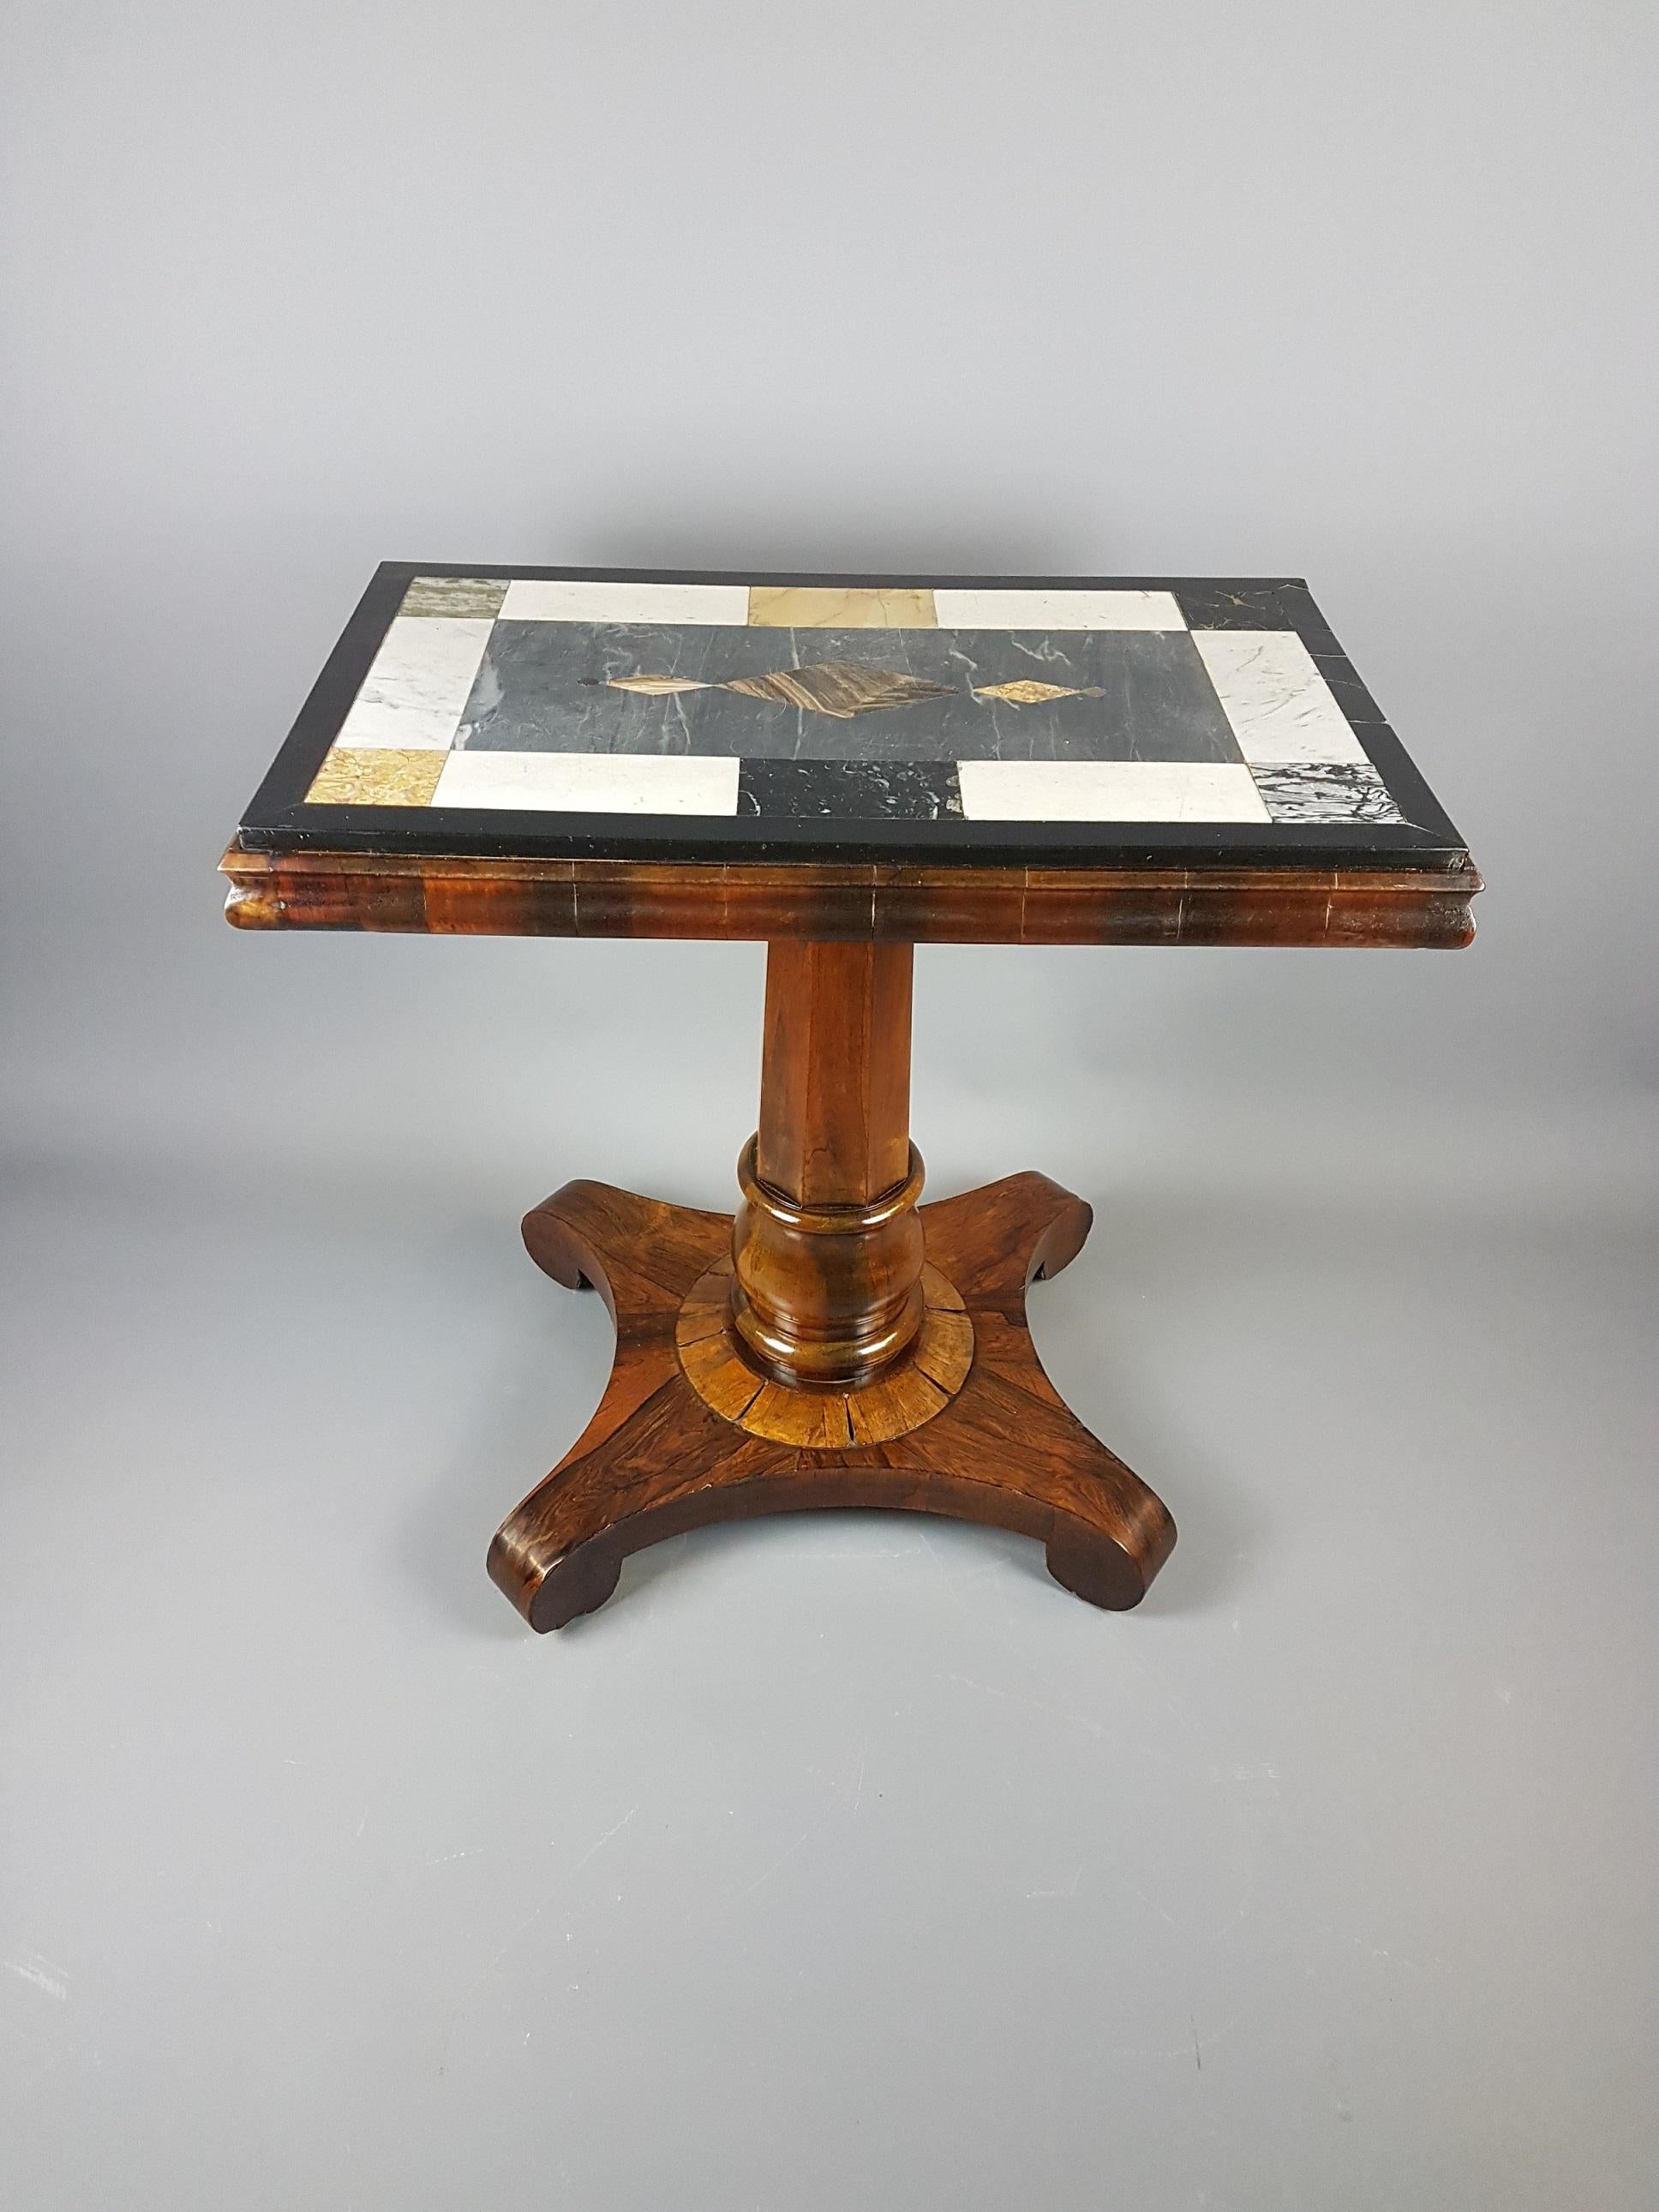 A great quality William IV centre table veneered in rosewood with a decorative specimen marble top. It is in good condition although has a few minor loses to the veneer at the base which is photographed. There is one section on the top that is